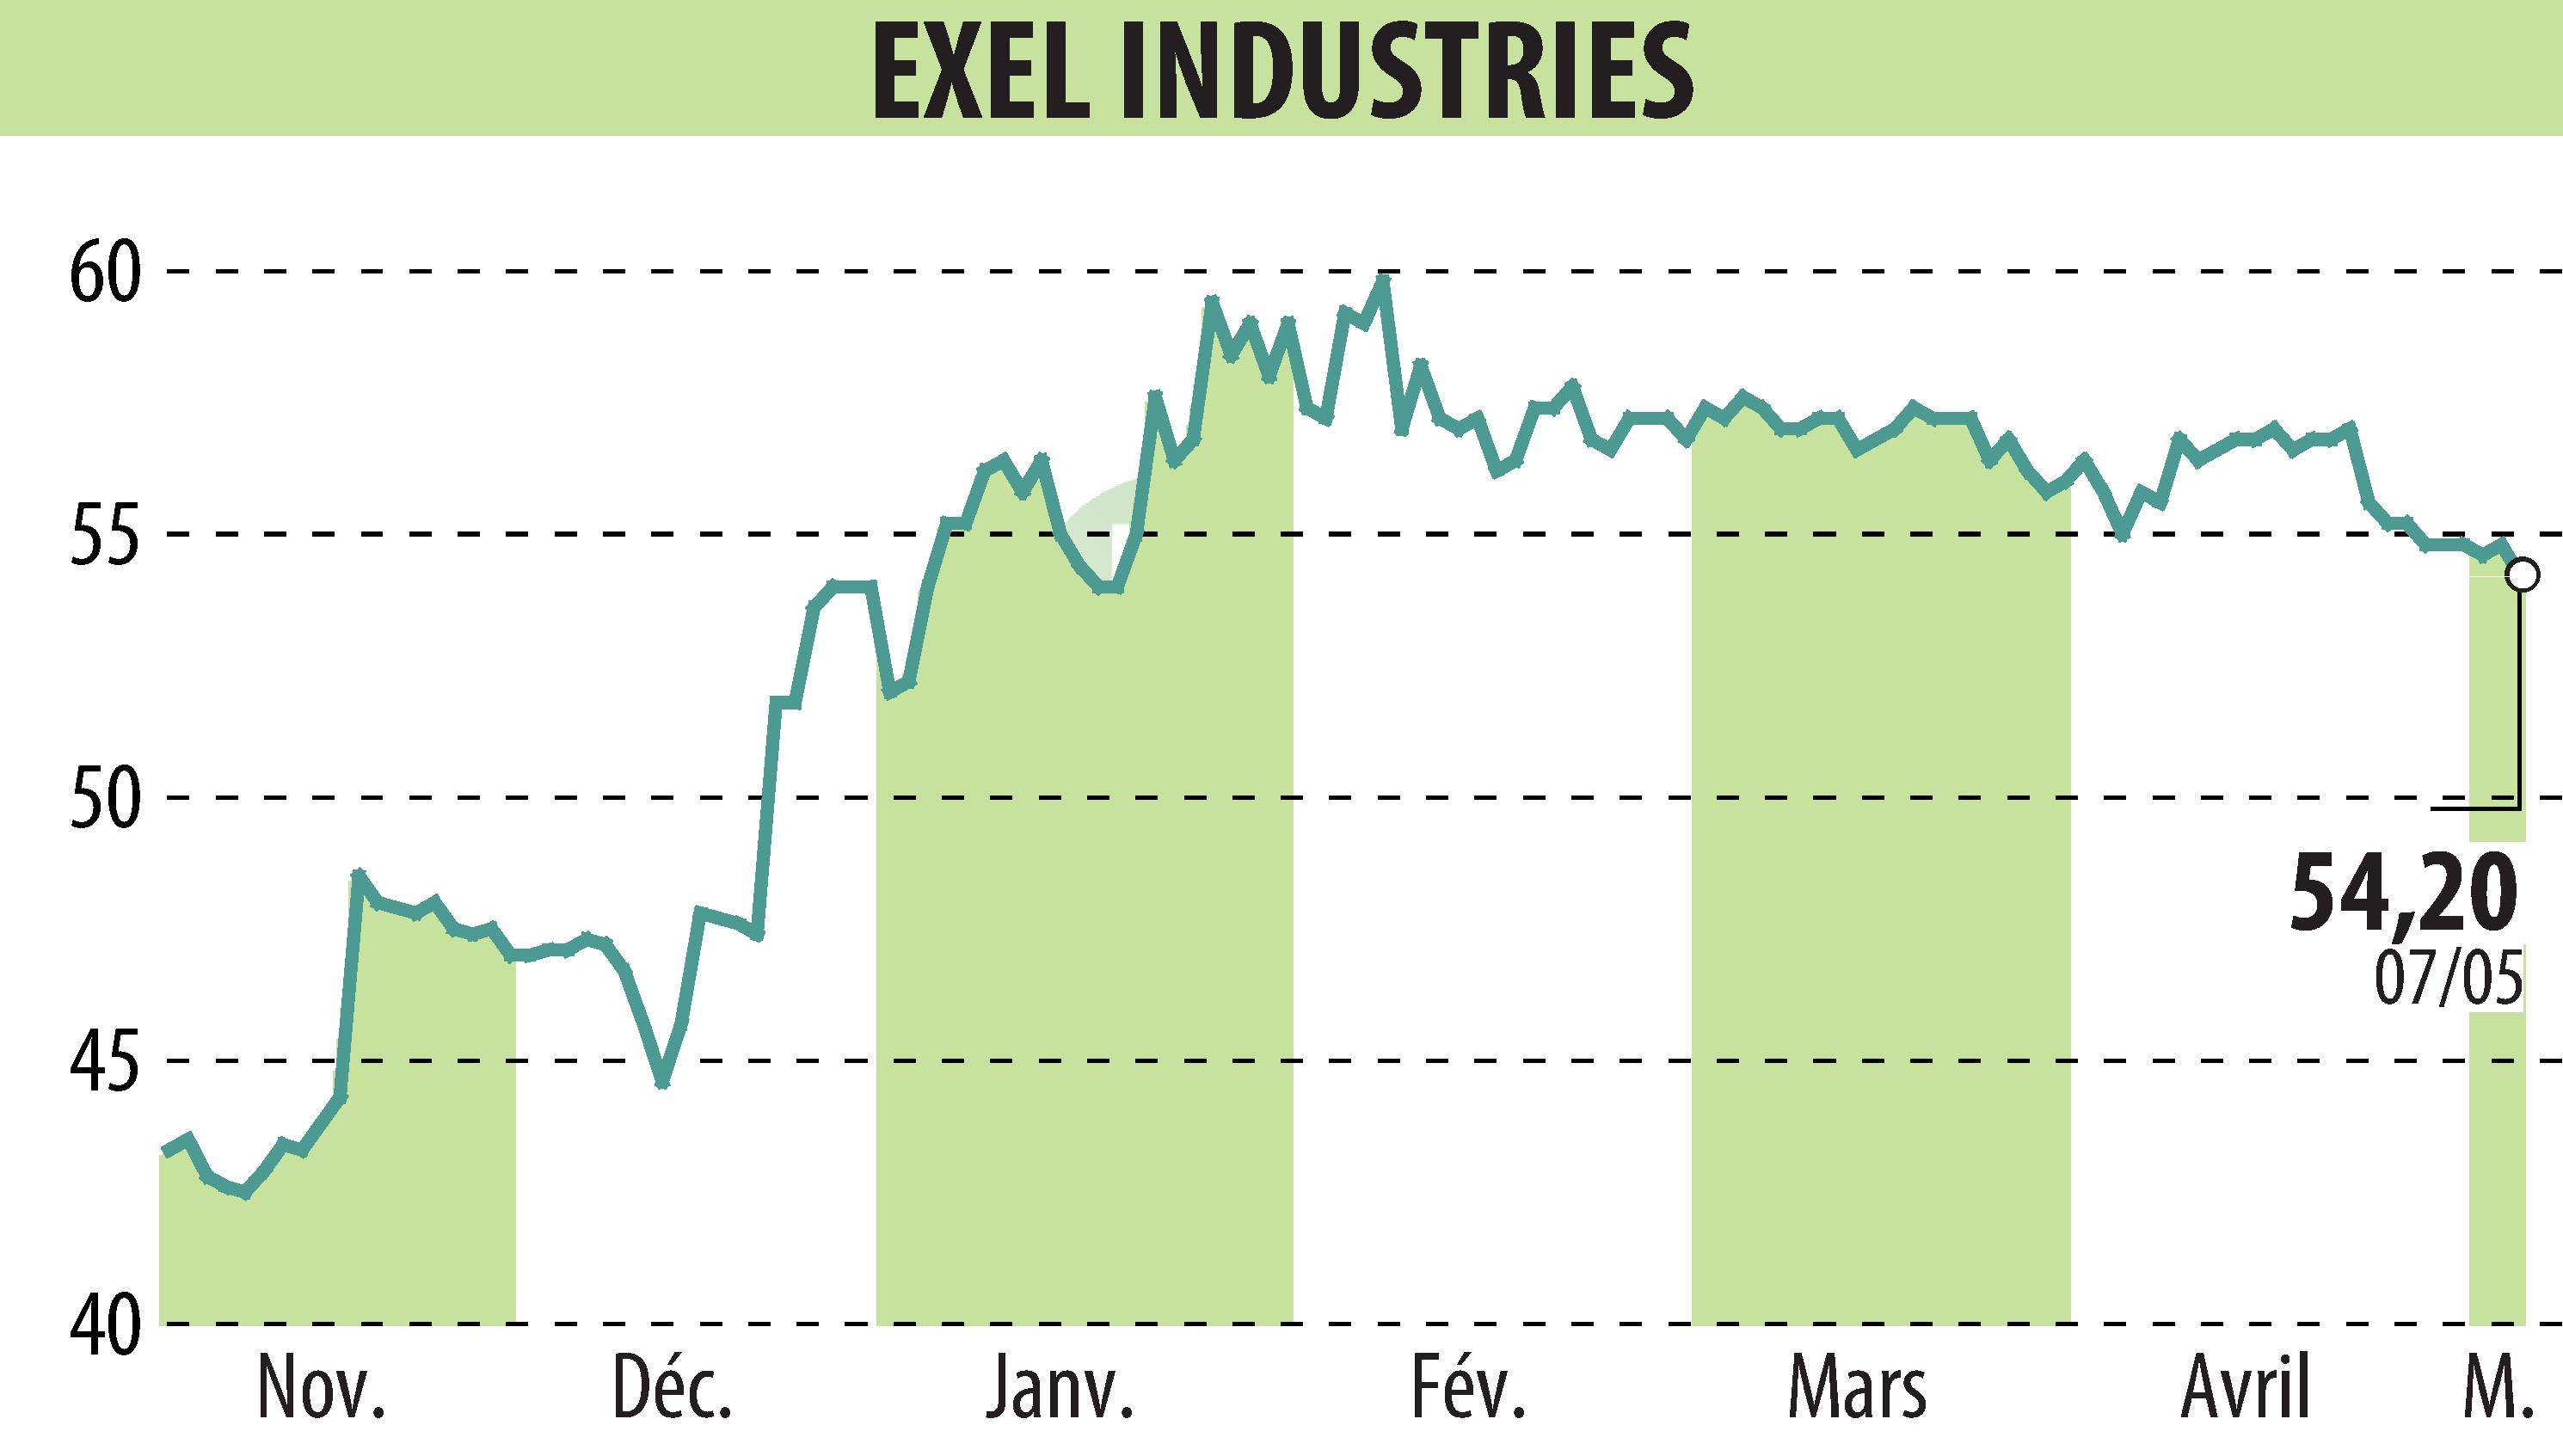 Stock price chart of EXEL INDUSTRIES (EPA:EXE) showing fluctuations.